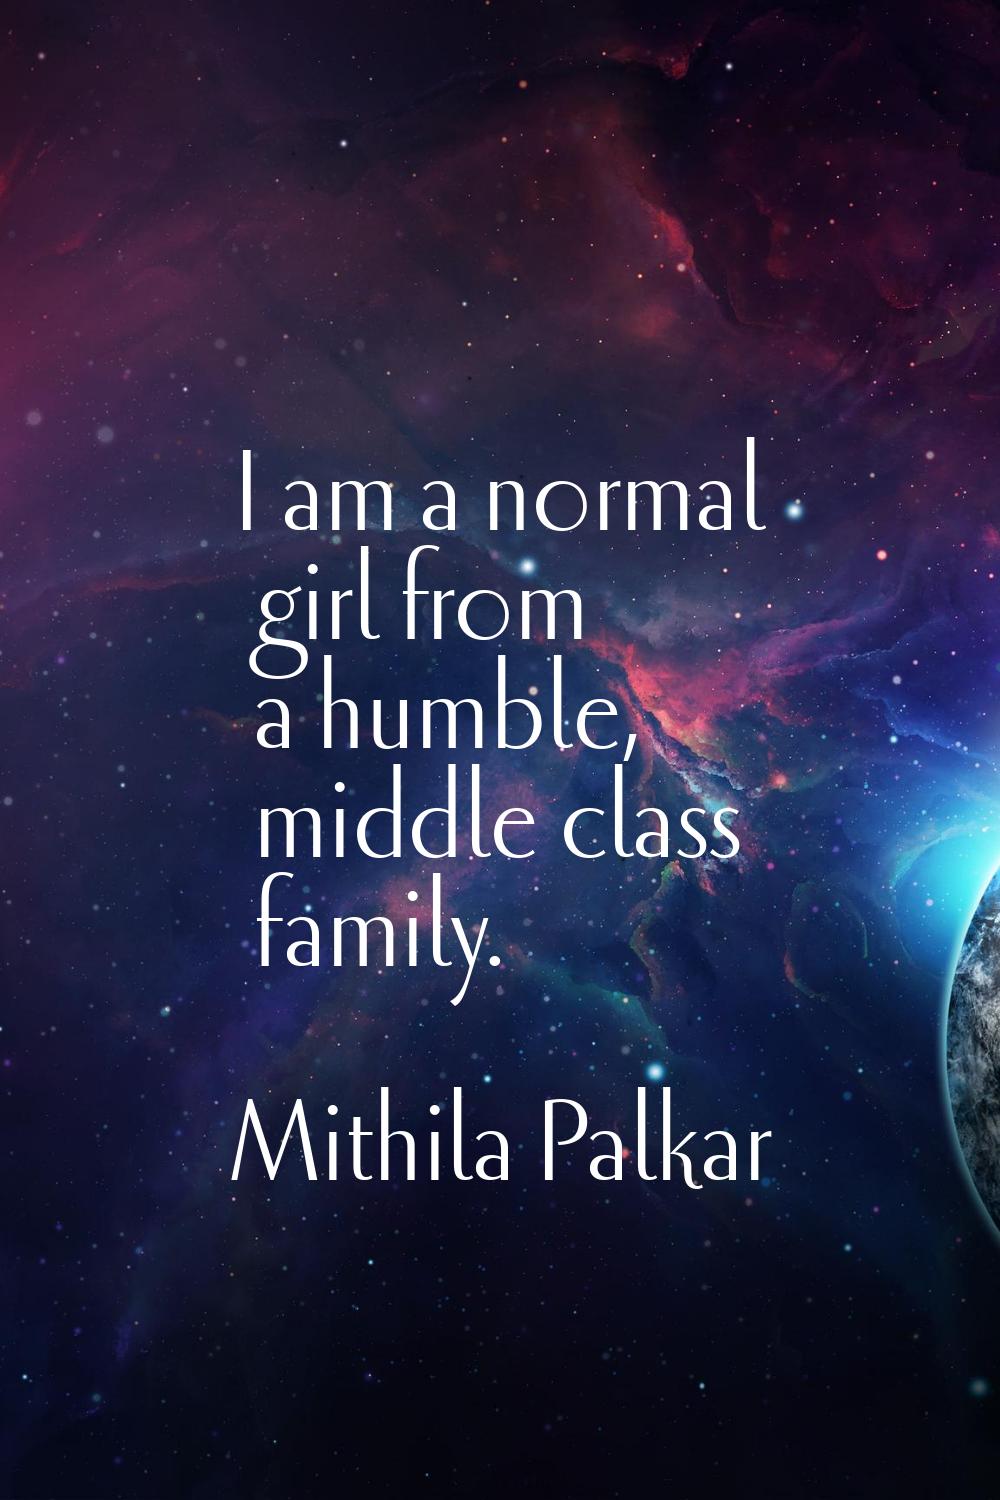 I am a normal girl from a humble, middle class family.